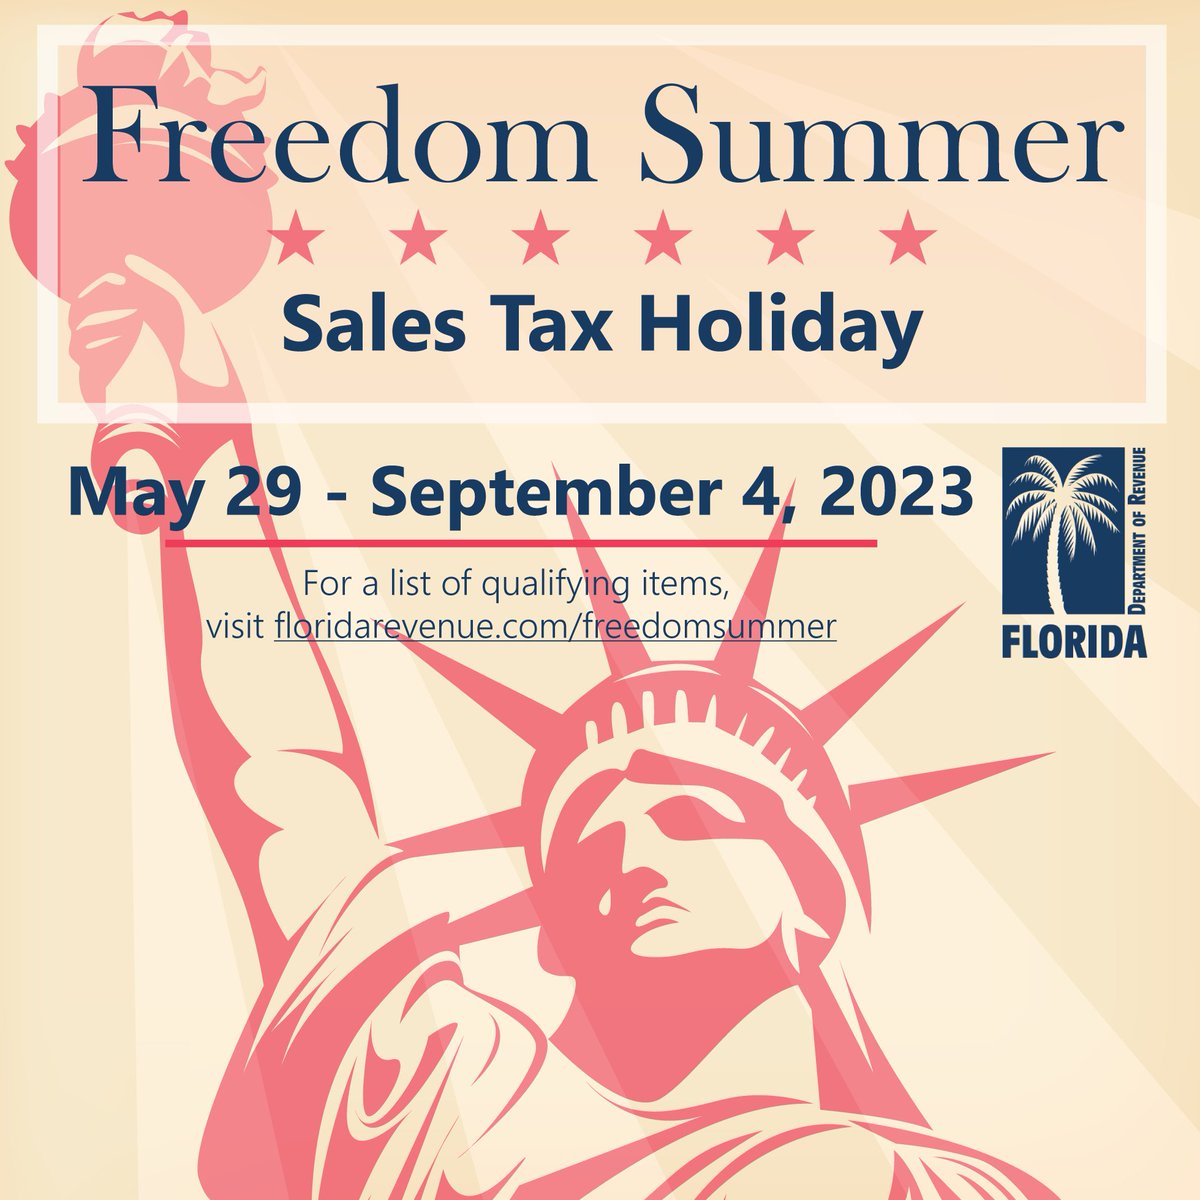 Looking for things to do for the last month of summer?

Thanks to the FL Department of Revenue's 2023 Freedom Summer Sales Tax Holiday, tickets to general outdoor supplies and so much more are sales tax-free through Sept. 4.
Find out more: bit.ly/3PxgzE2

#ALLINMartin👊